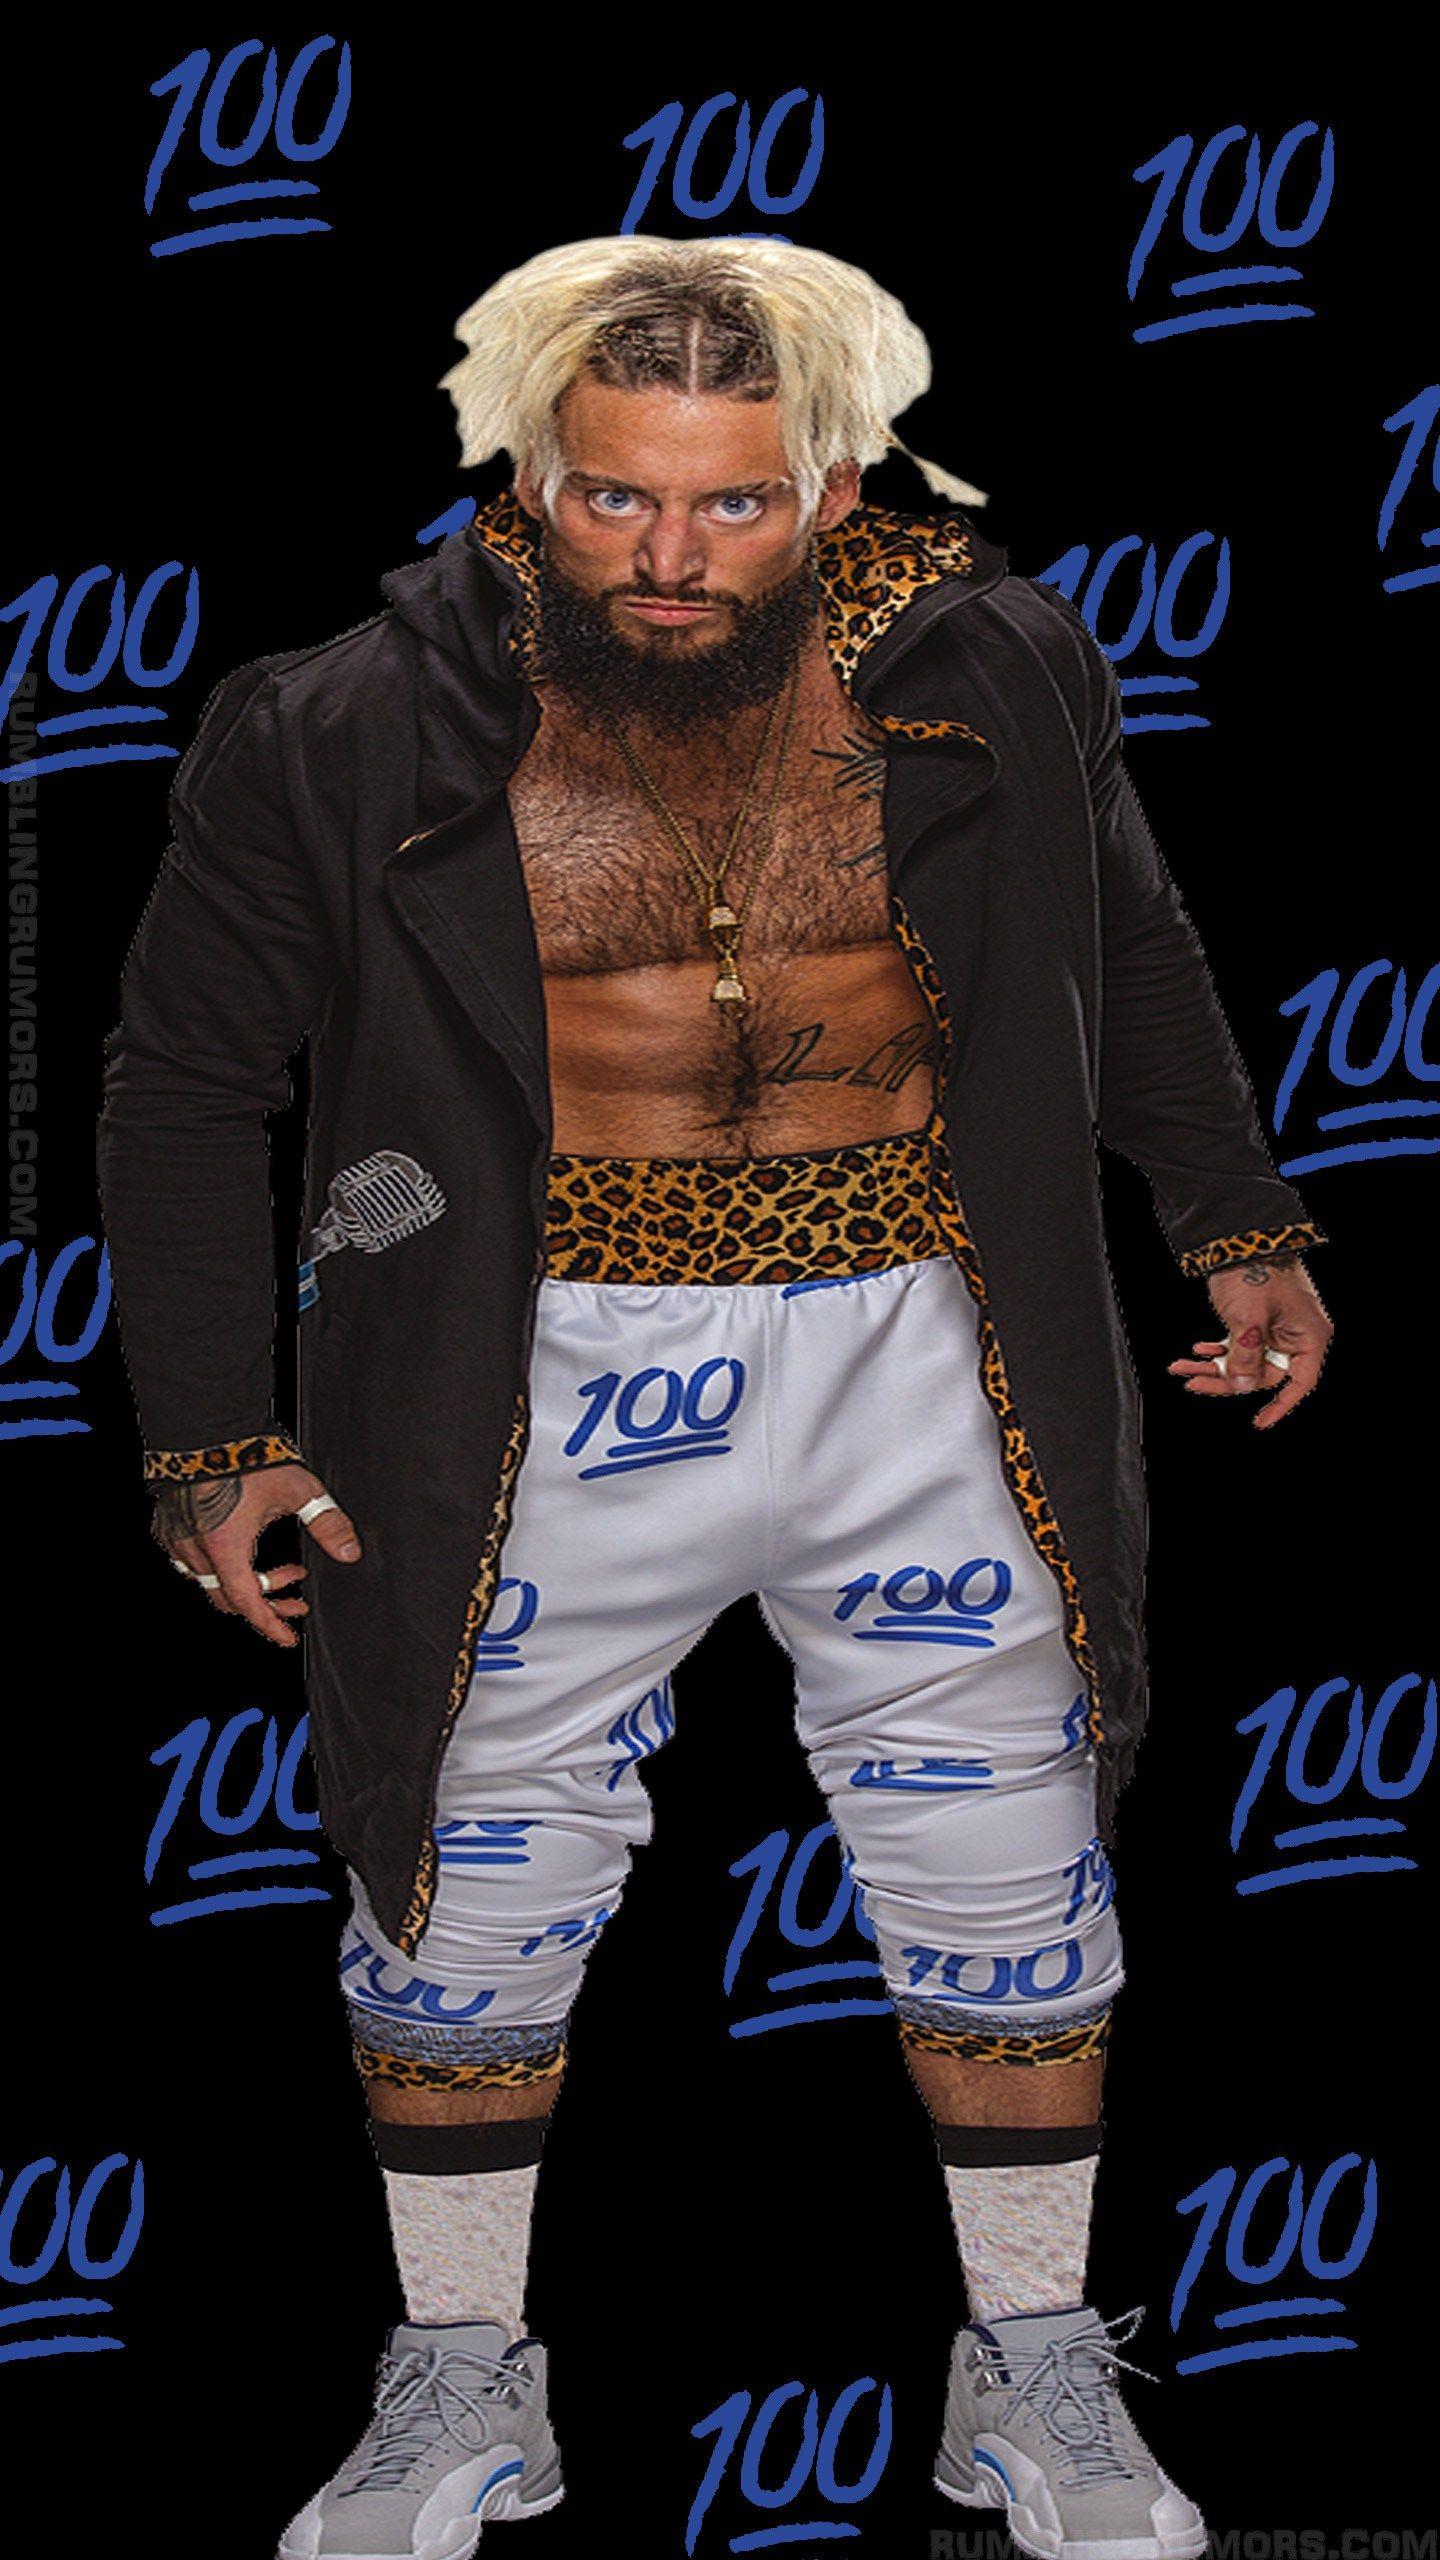 We have a “Cuppa” Wallpaper papers for ya! These Enzo Amore